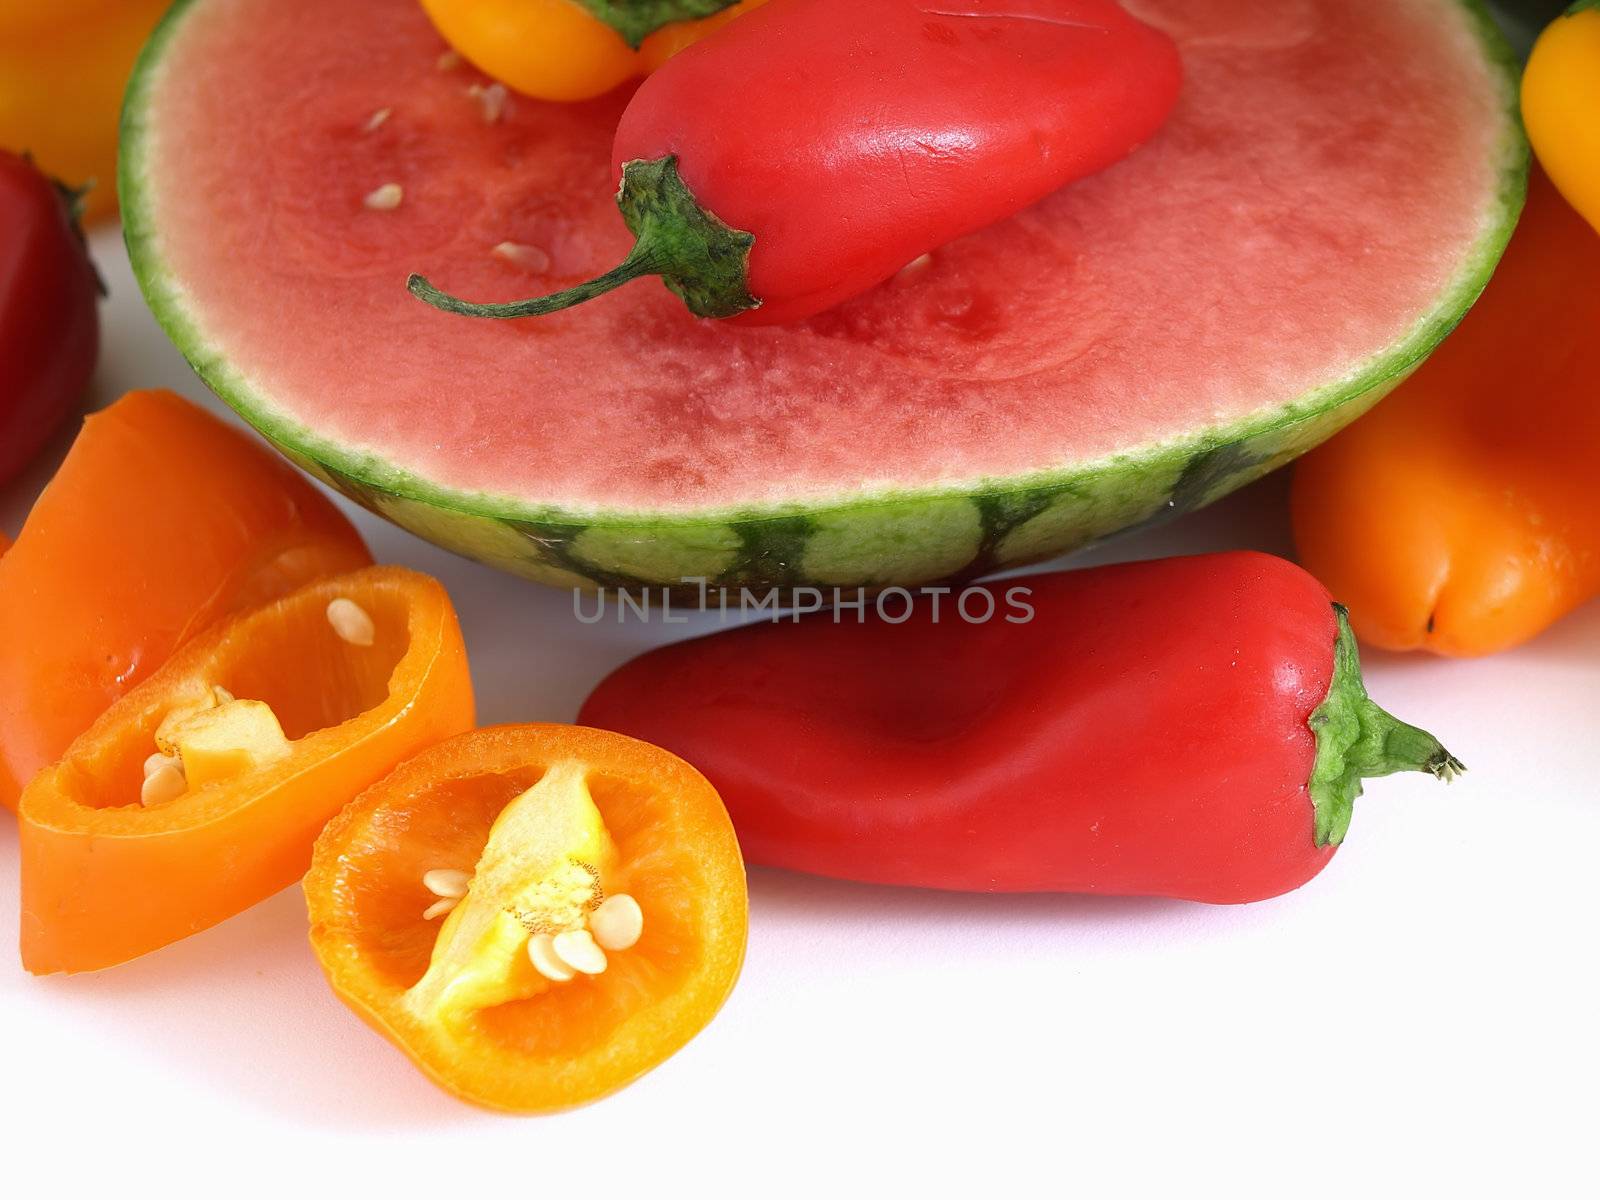 A vibrant summer crop of fresh juicy watermelon and colorful bell peppers, studio isolated over a white background.